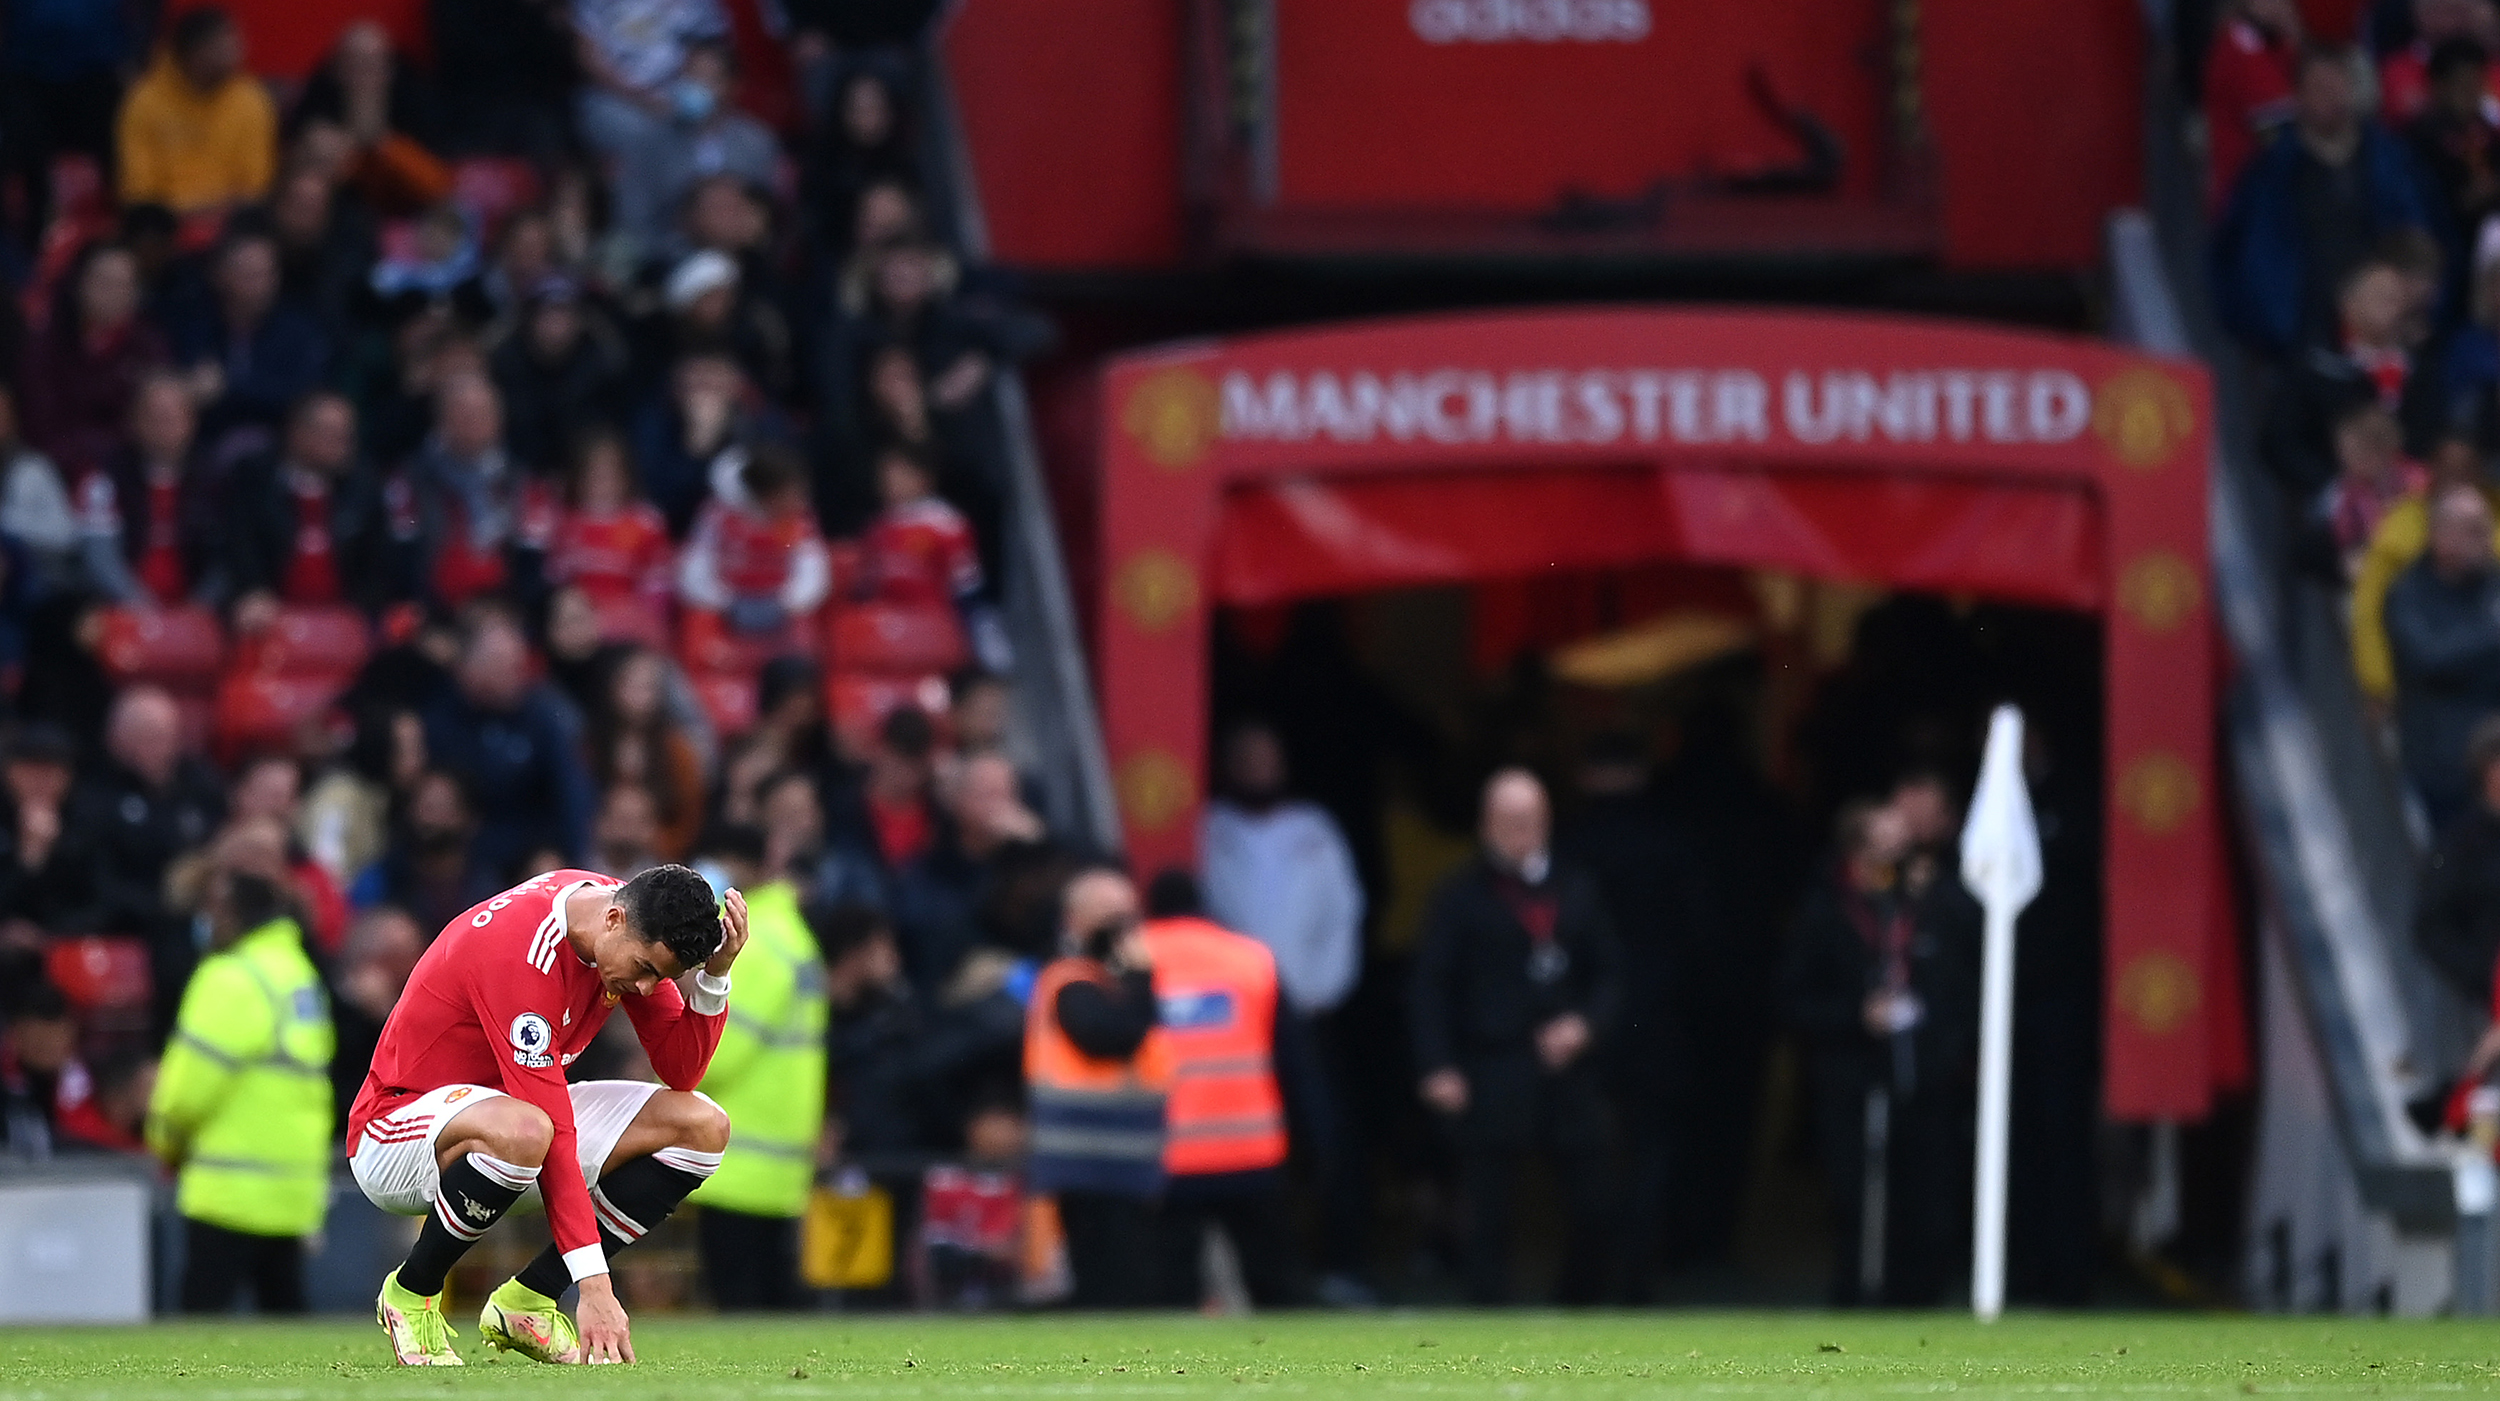 Cristiano Ronaldo of Manchester United looks dejected during the Premier League match between Manchester United and Liverpool at Old Trafford on October 24, 2021 in Manchester, England.